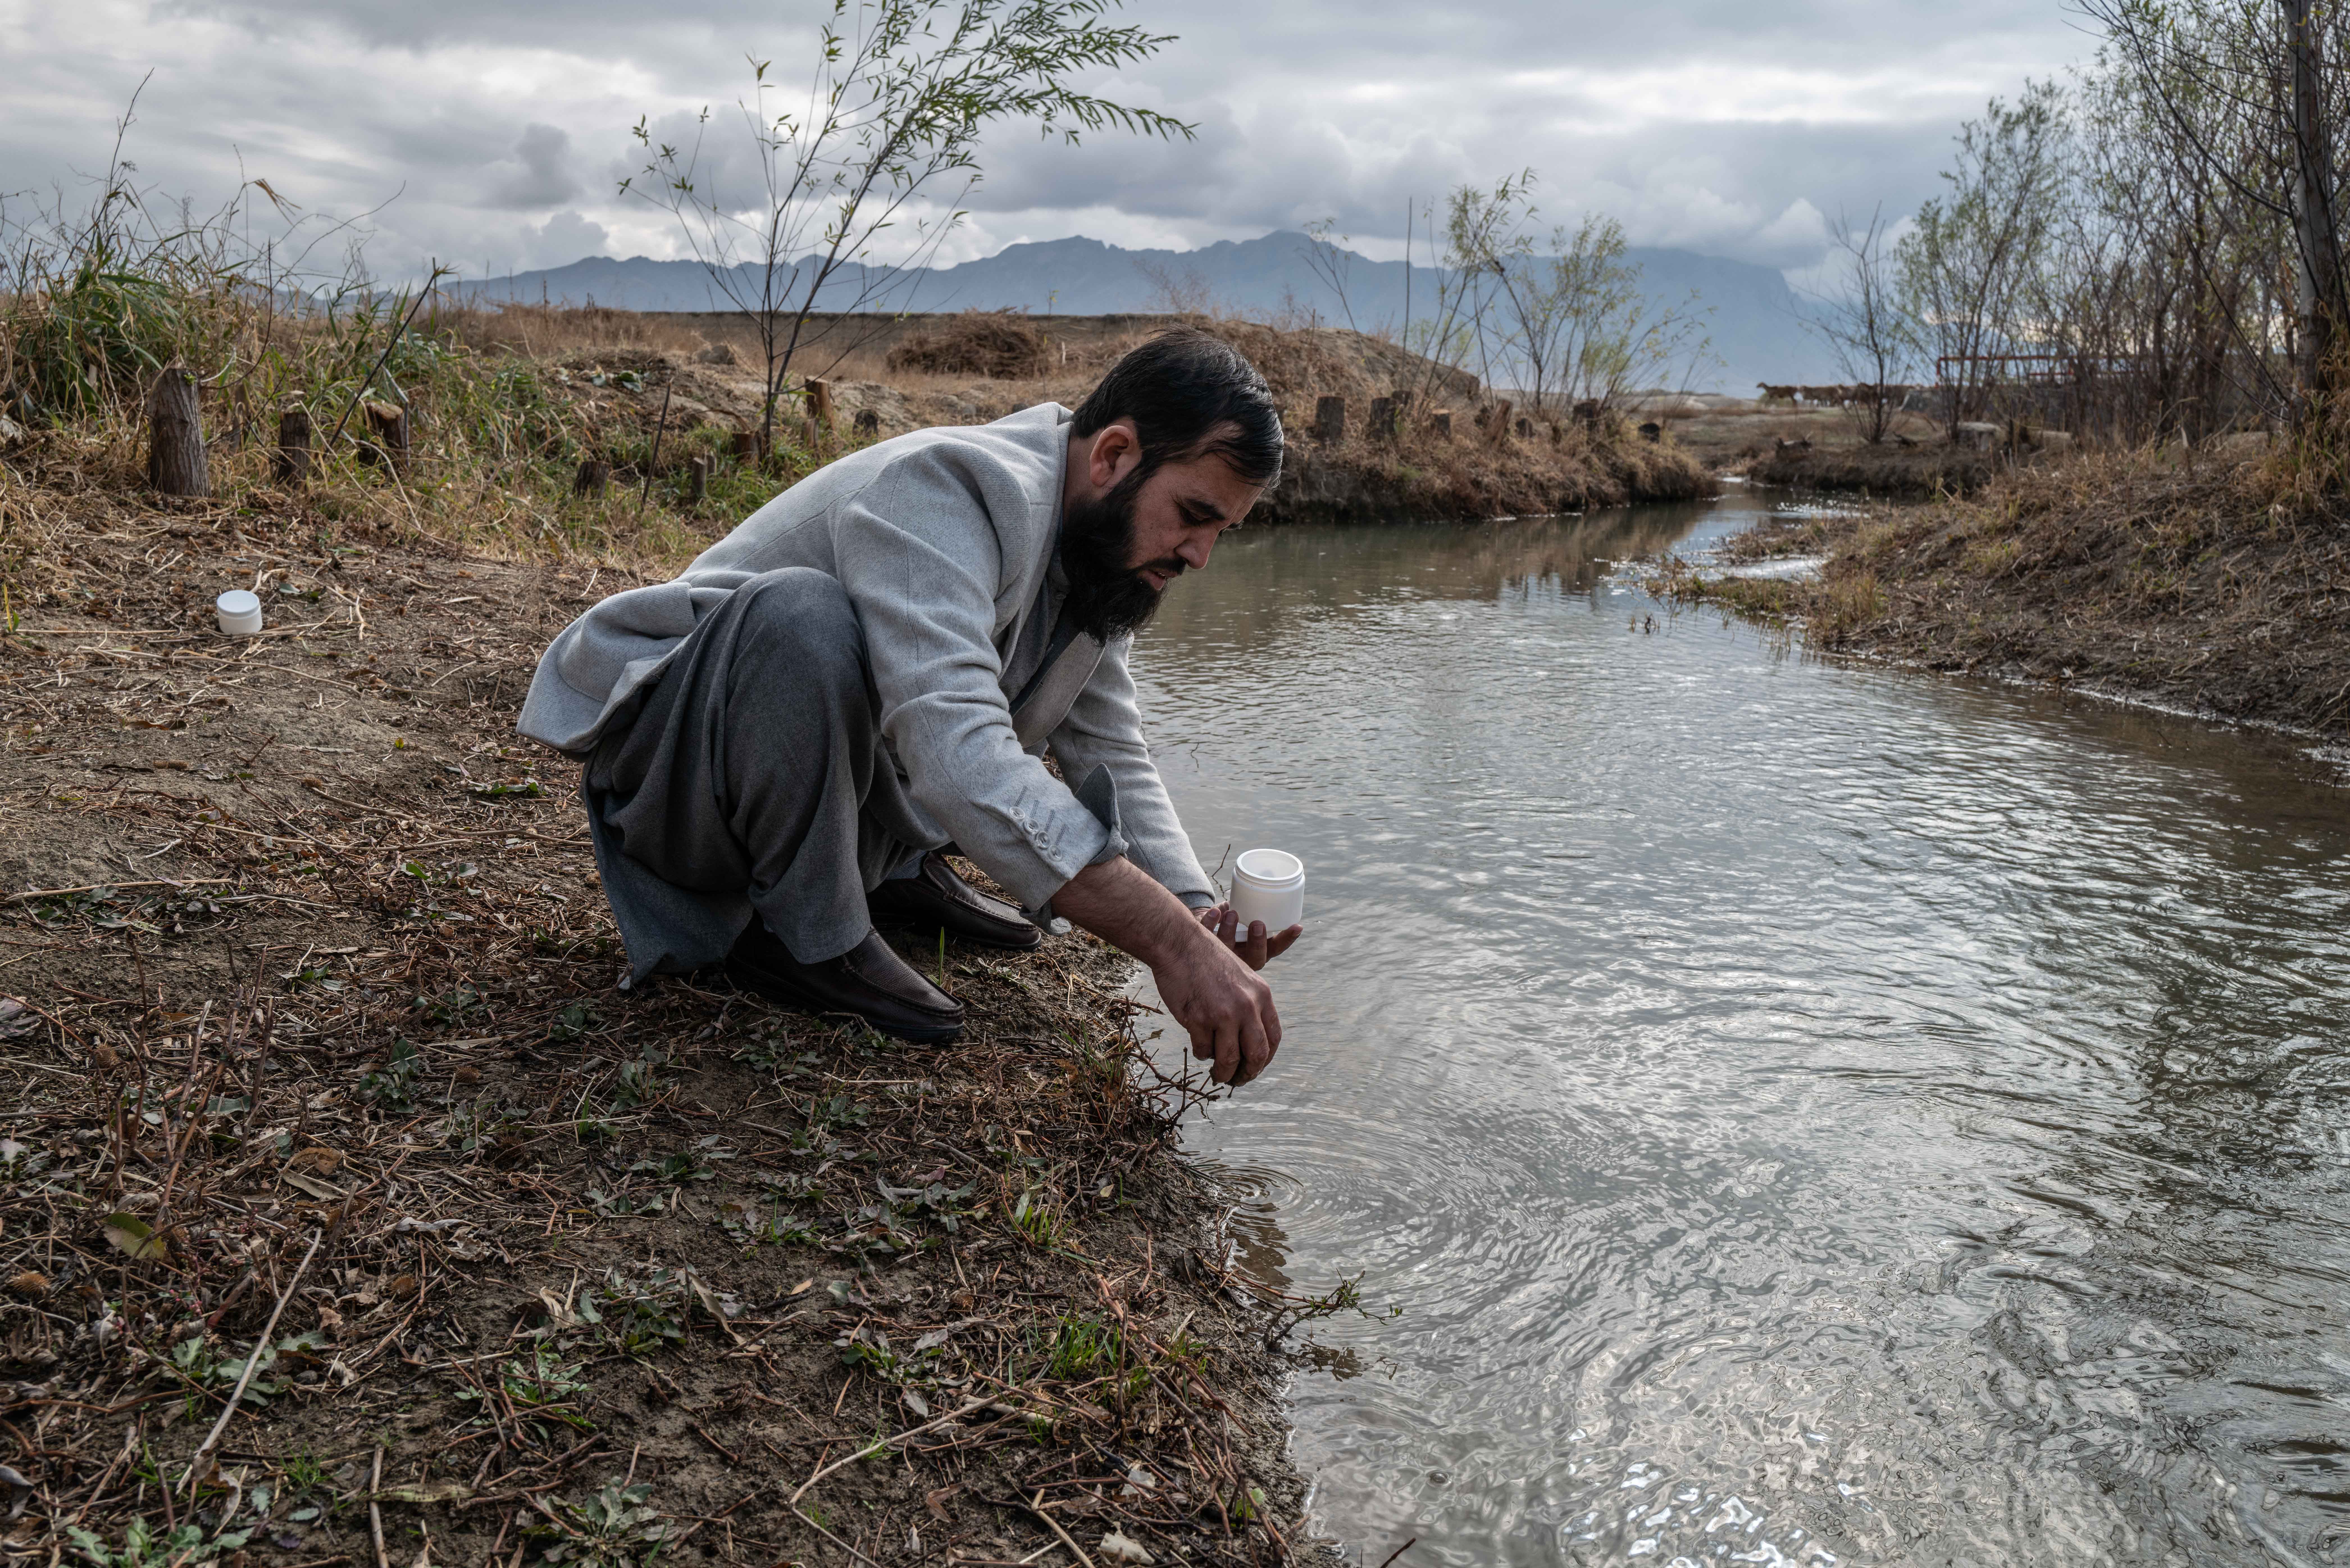 An Afghan scientist gathers water and soil samples at a water outflow from Bagram Airfield, formerly America's largest military base in Afghanistan. Credit: Kern Hendricks